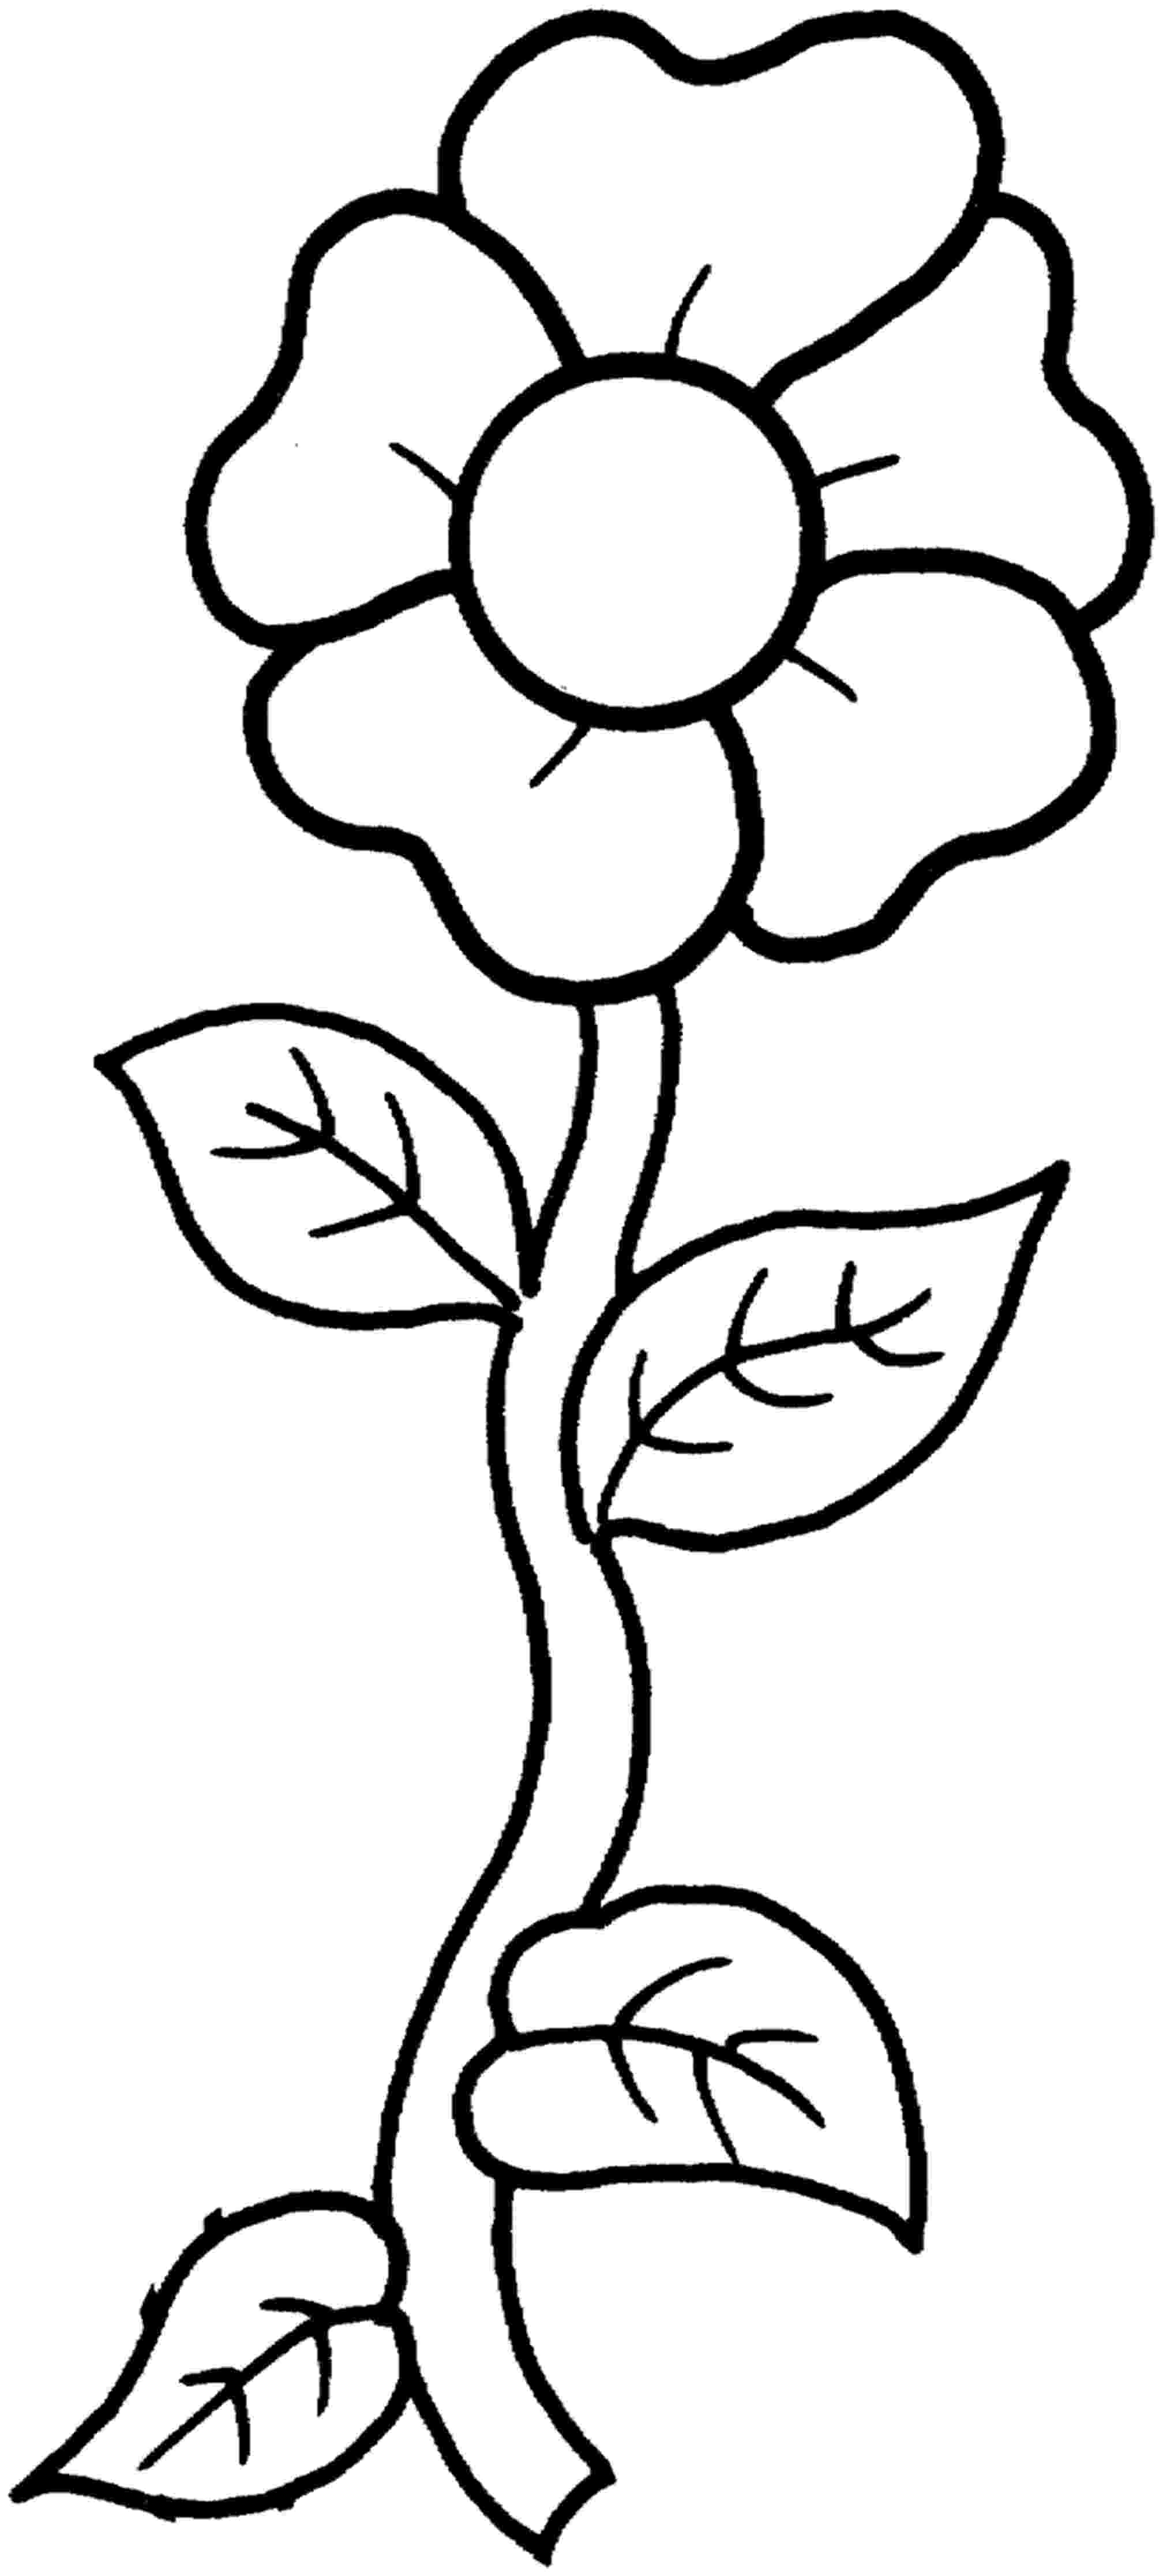 flower colouring pages to print free printable flower coloring pages for kids best pages print to colouring flower 1 1